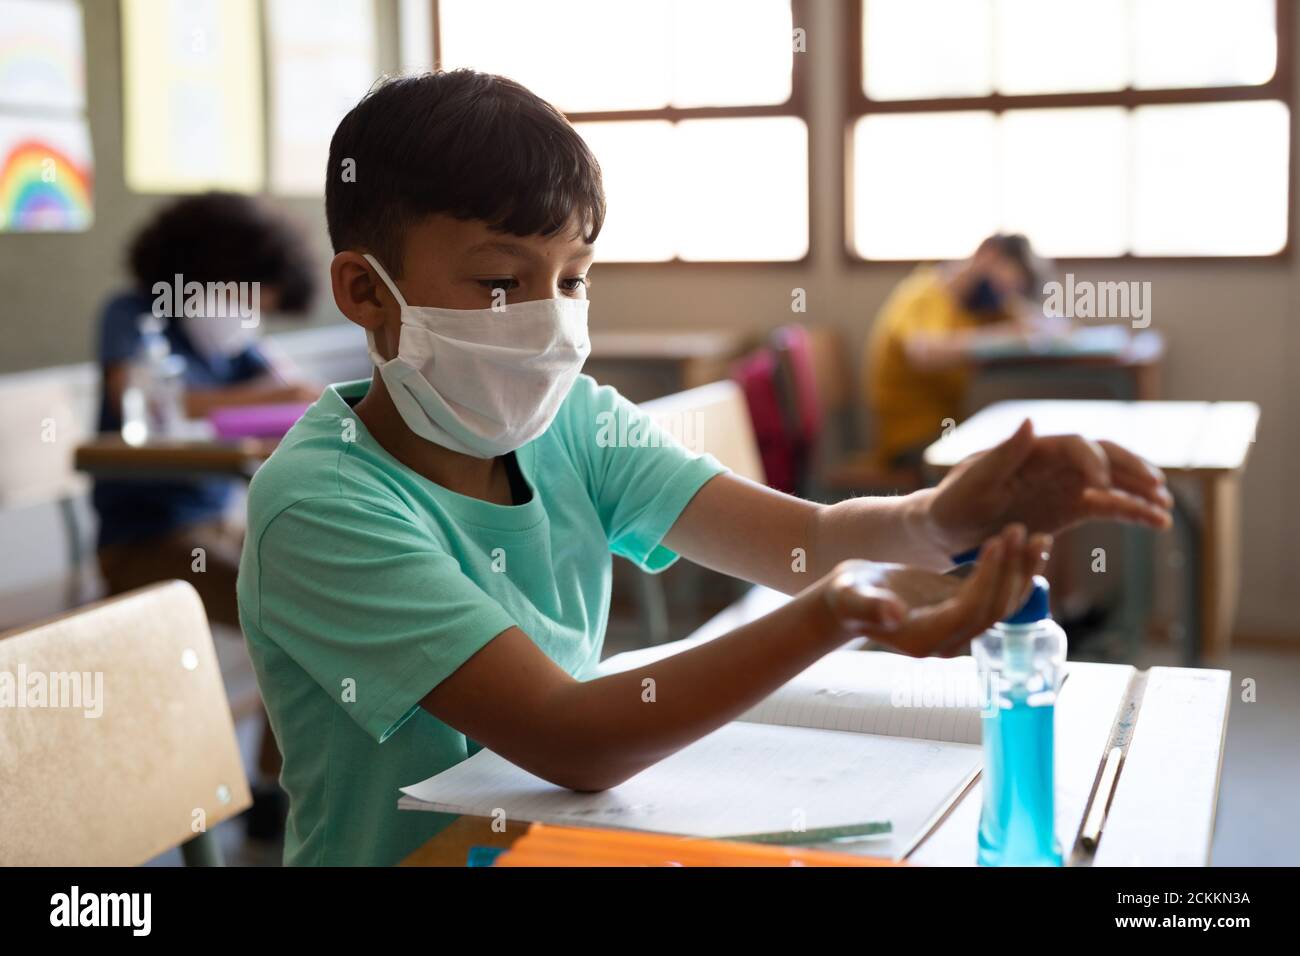 Boy wearing face mask sanitizing his hands while sitting on his desk at school Stock Photo